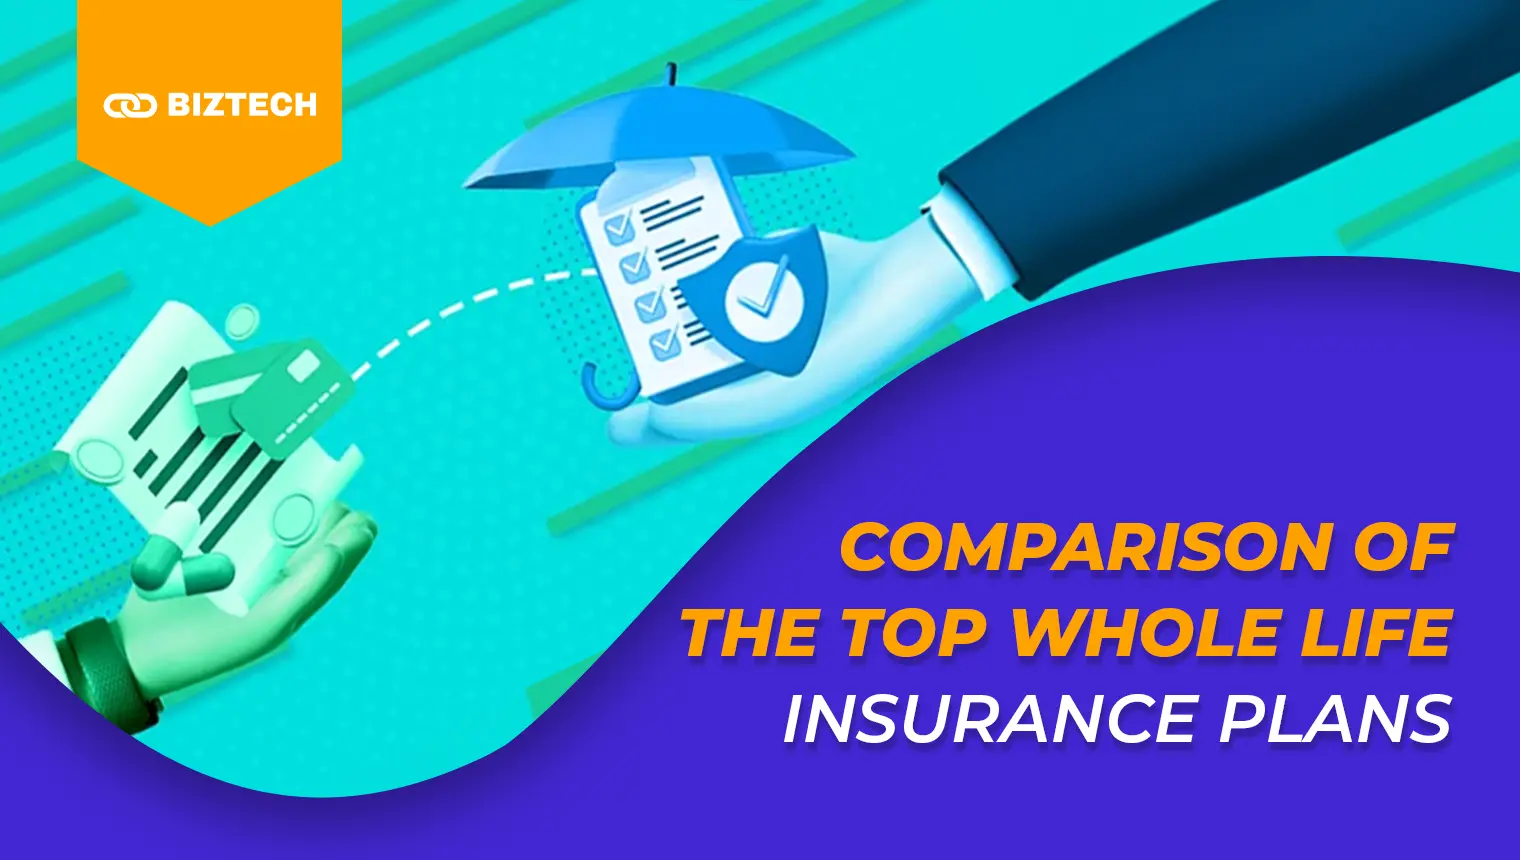 Comparison of the Top Whole Life Insurance Plans